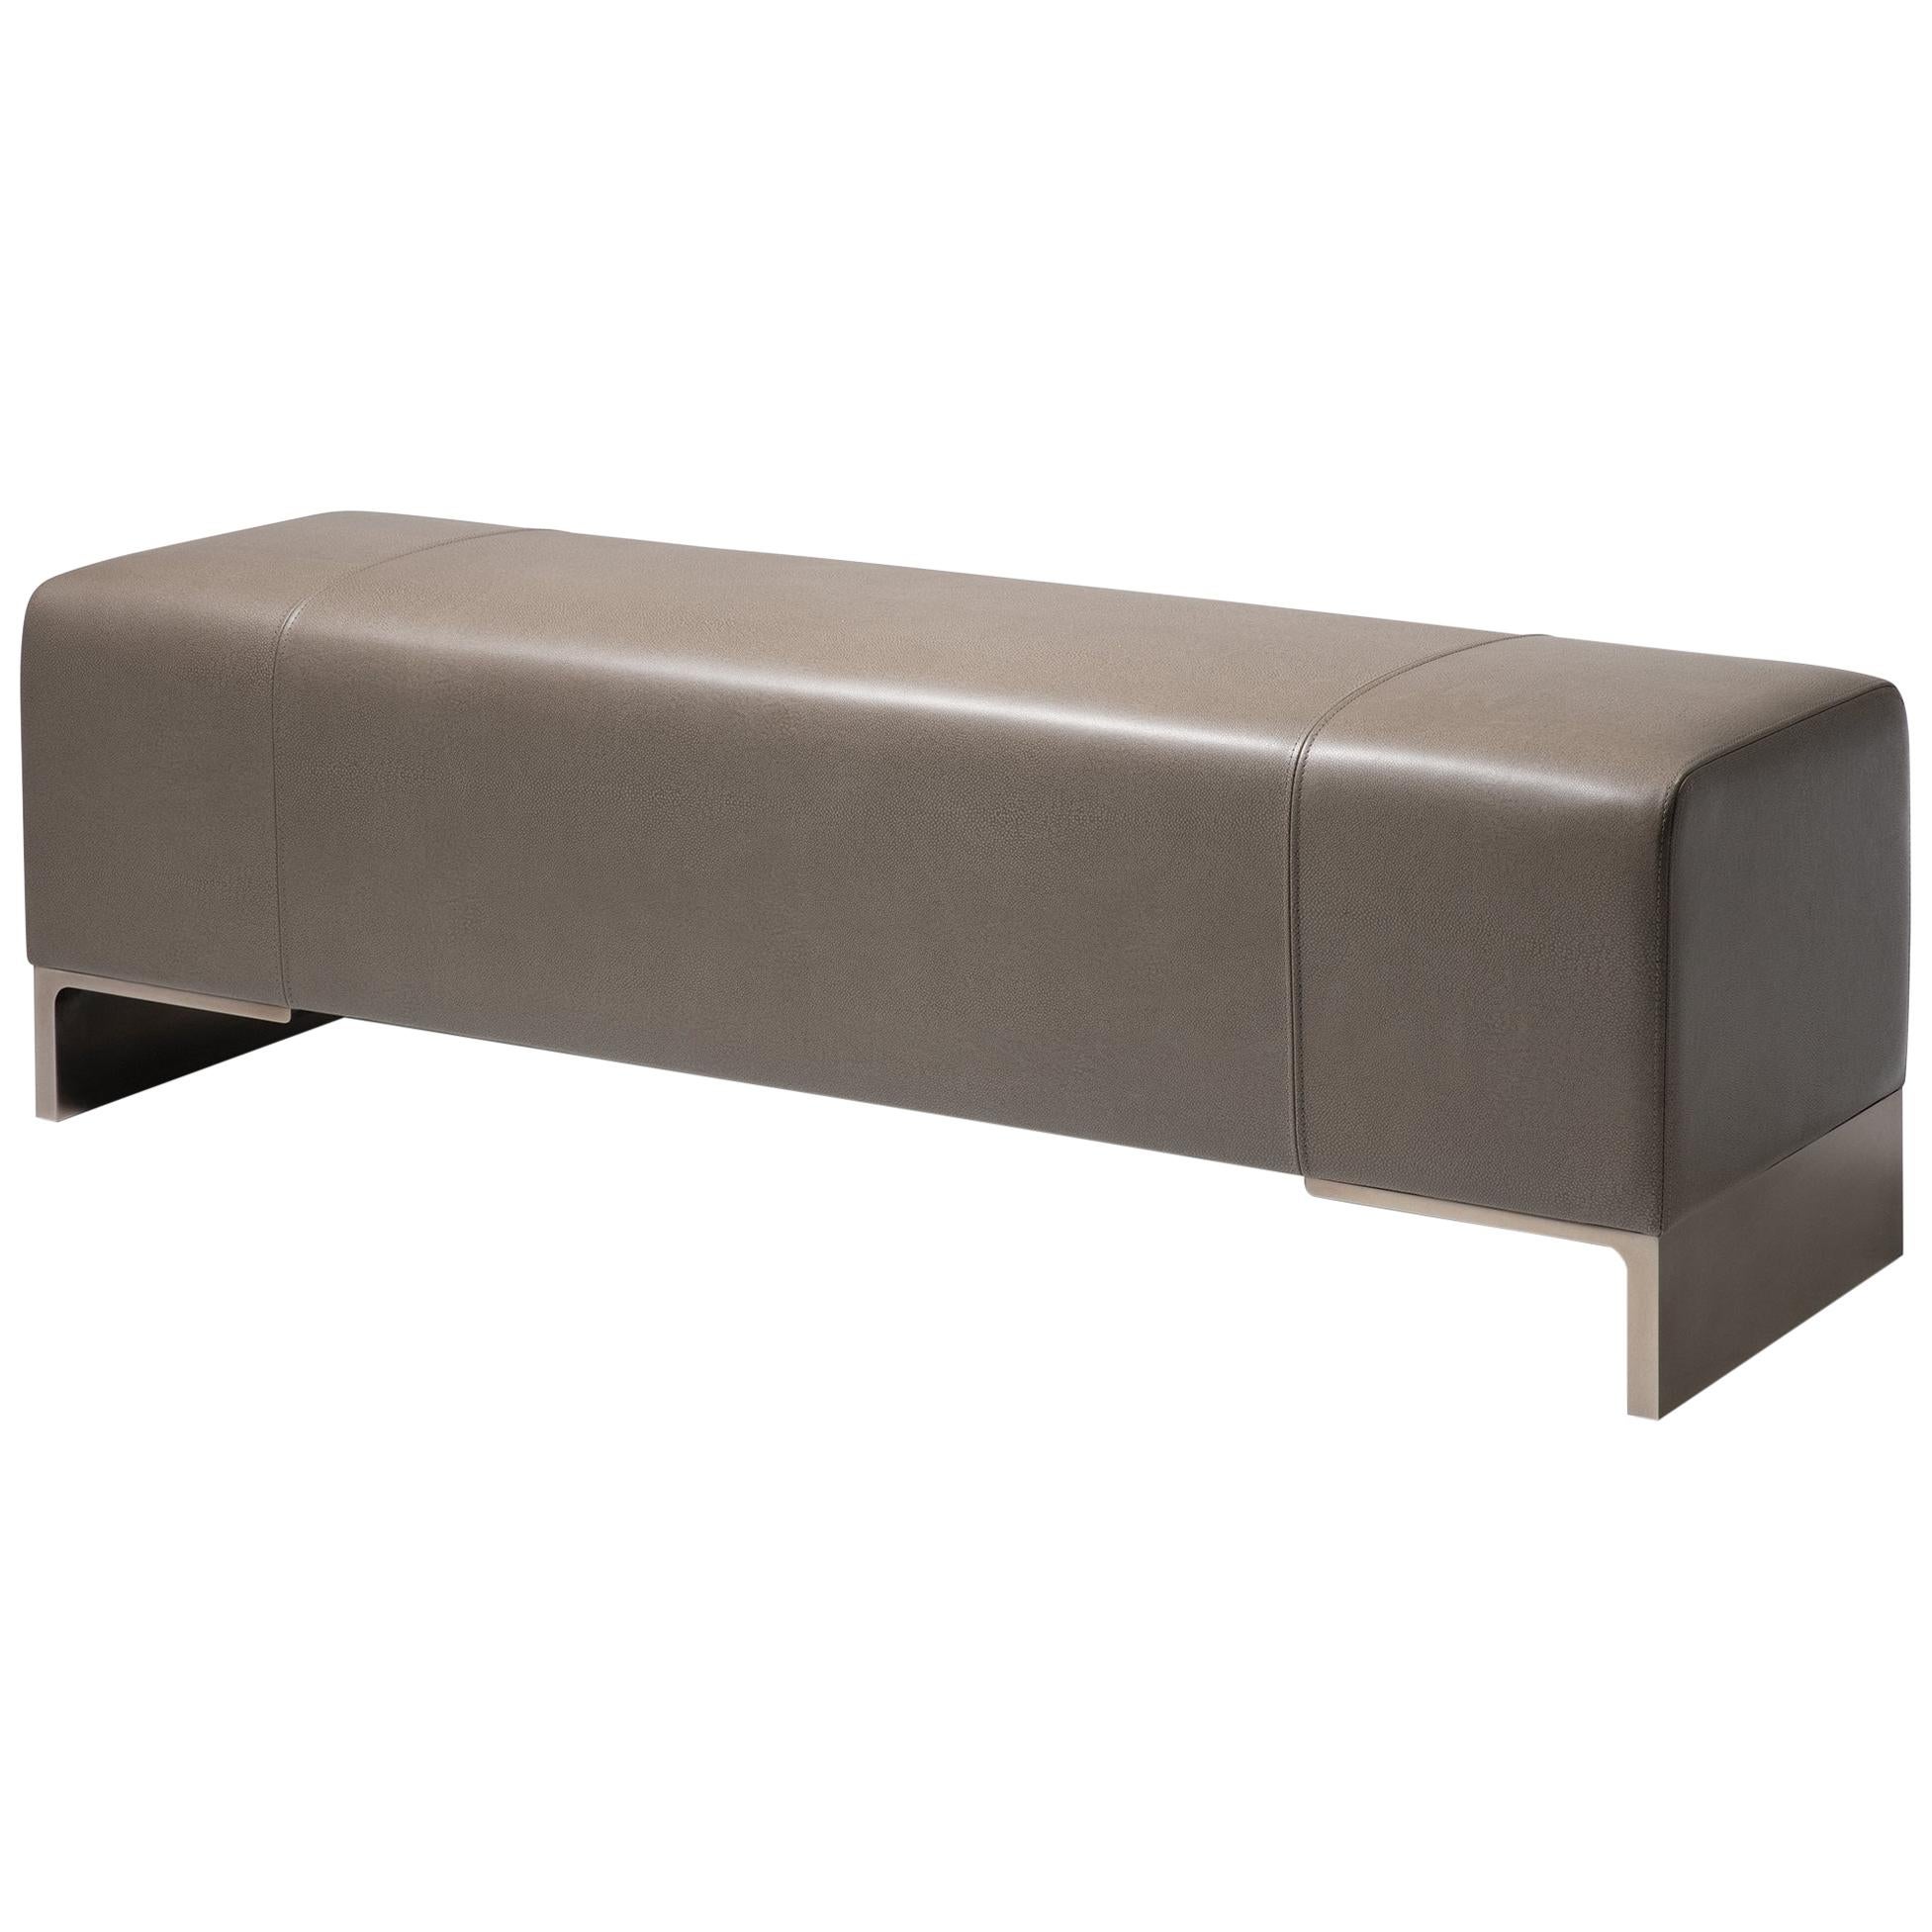 HOLLY HUNT Arakan Bench in Silver Smoke and Terra Leather